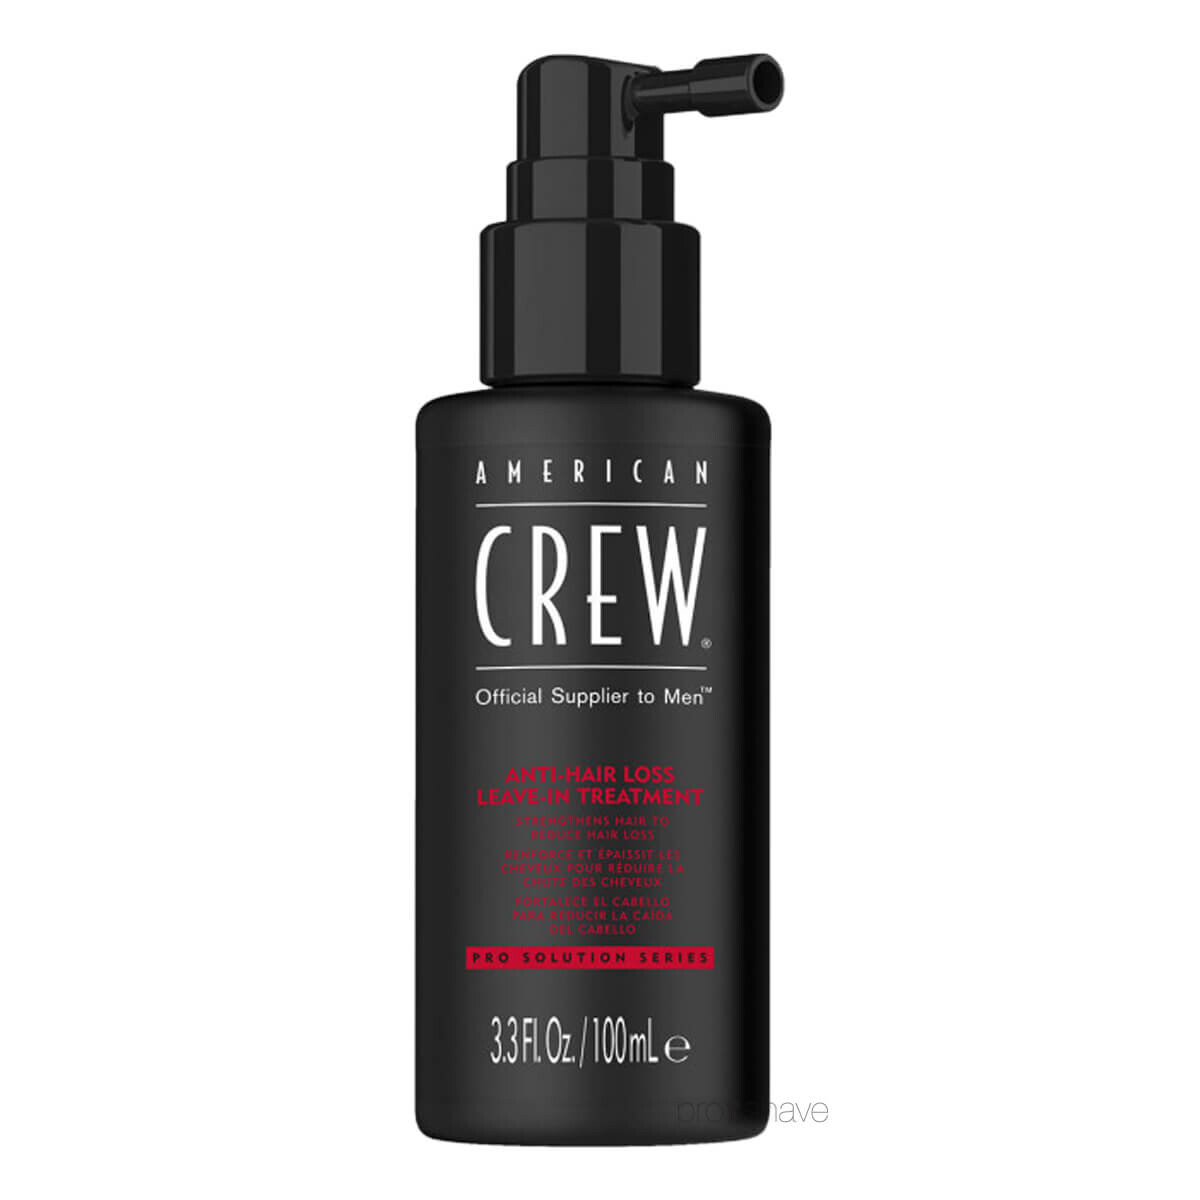 Billede af American Crew Anti-Hairloss Leave-in Treatment, 100 ml.